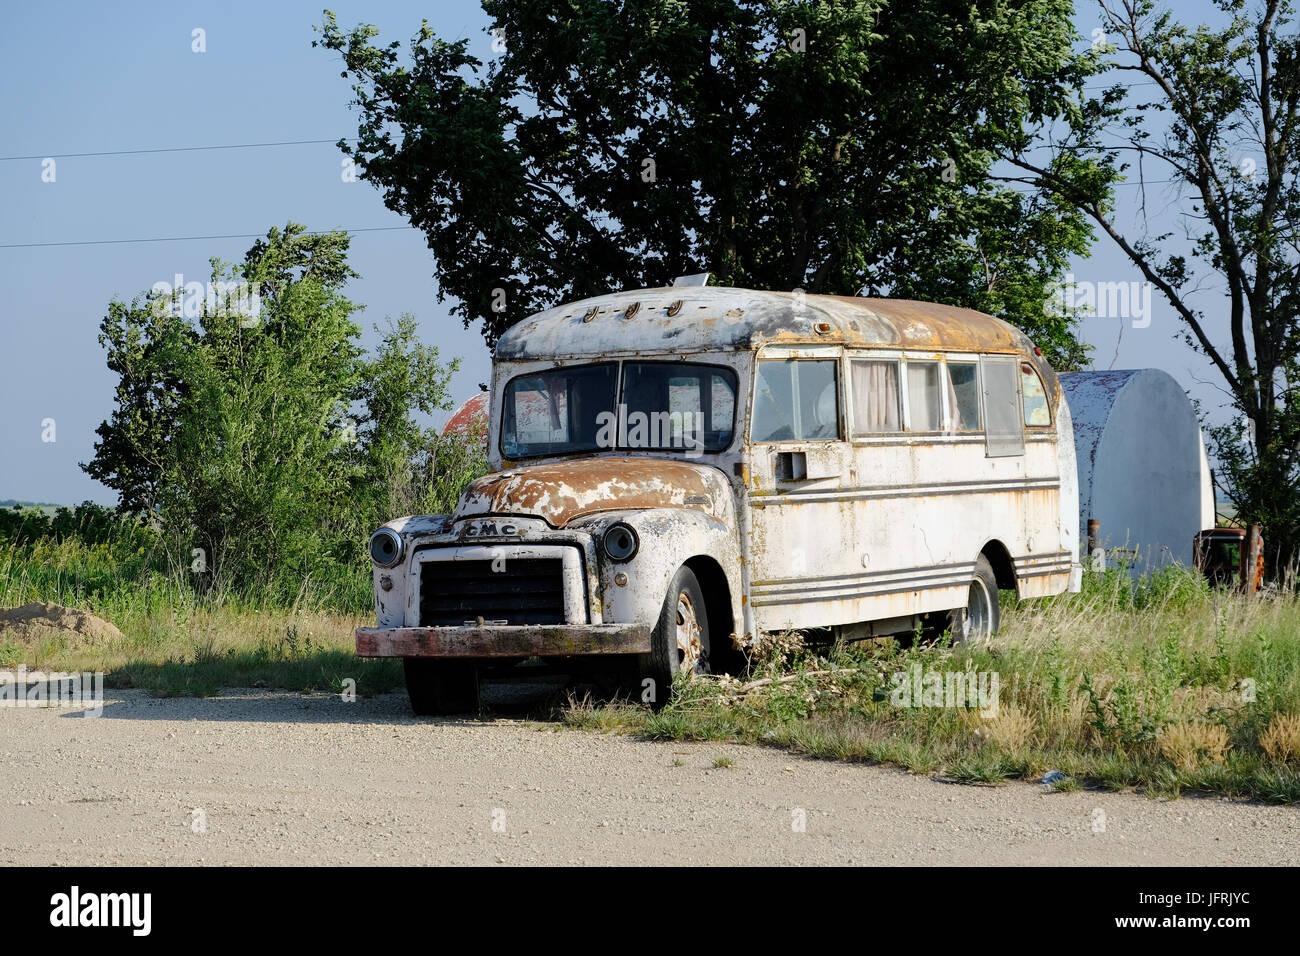 Old GMC bus converted into an RV camper sits abandoned in rural Kansas. Stock Photo